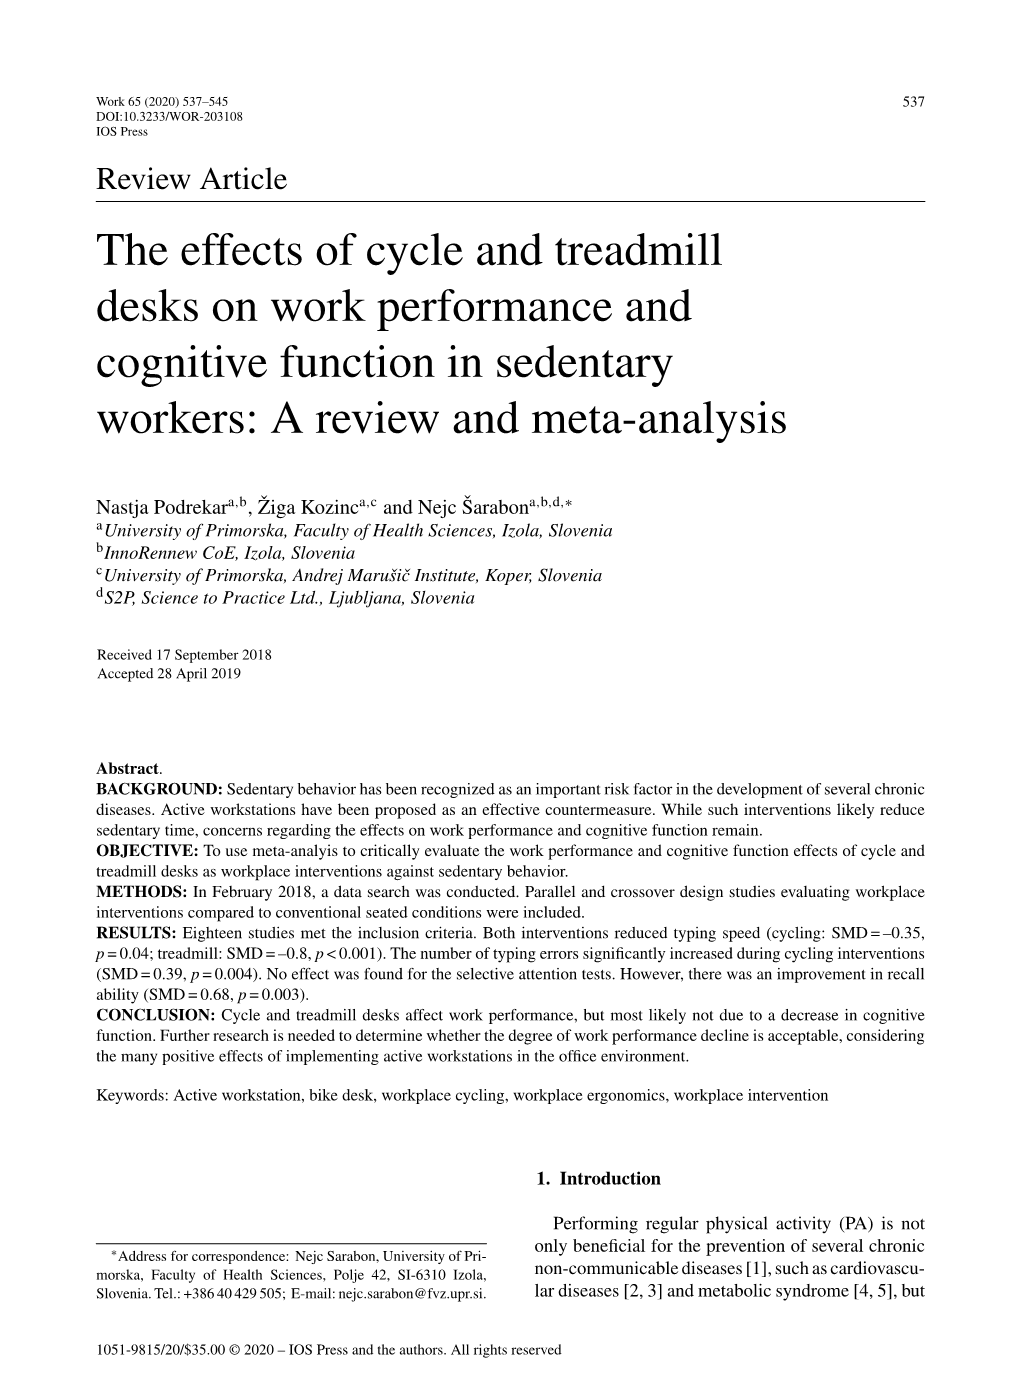 The Effects of Cycle and Treadmill Desks on Work Performance and Cognitive Function in Sedentary Workers: a Review and Meta-Analysis